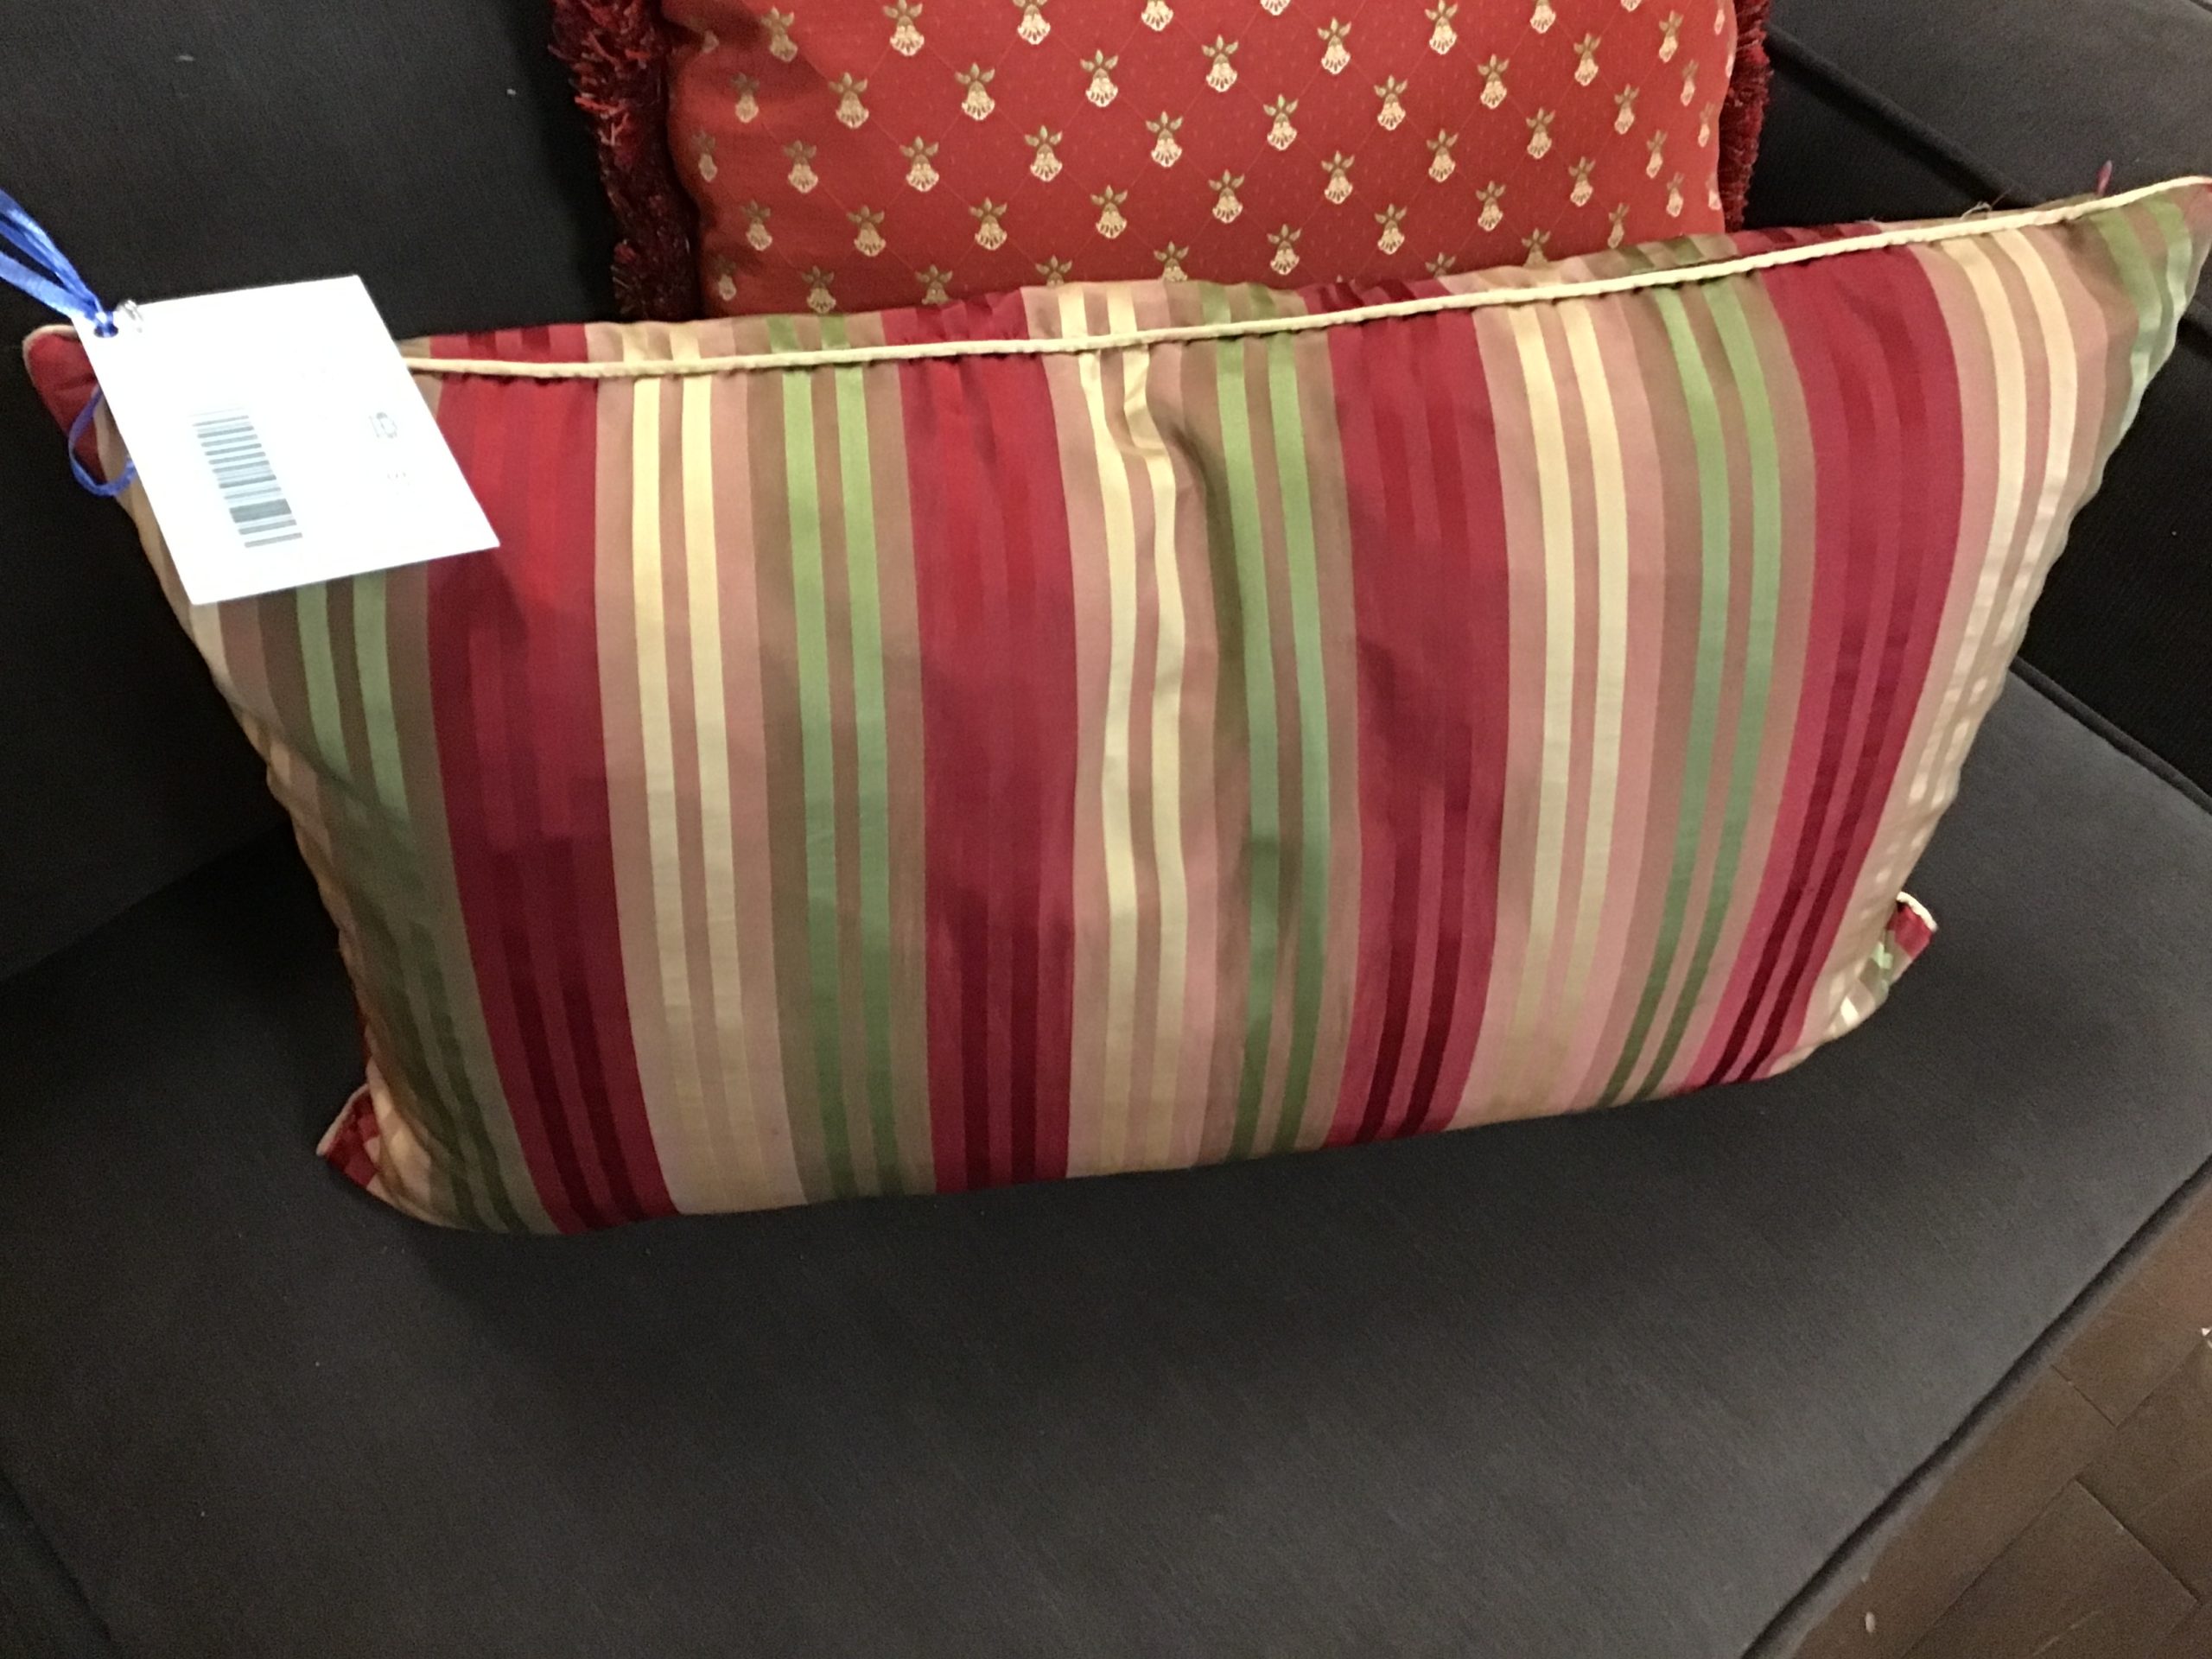 Striped Down Filled Throw Pillow